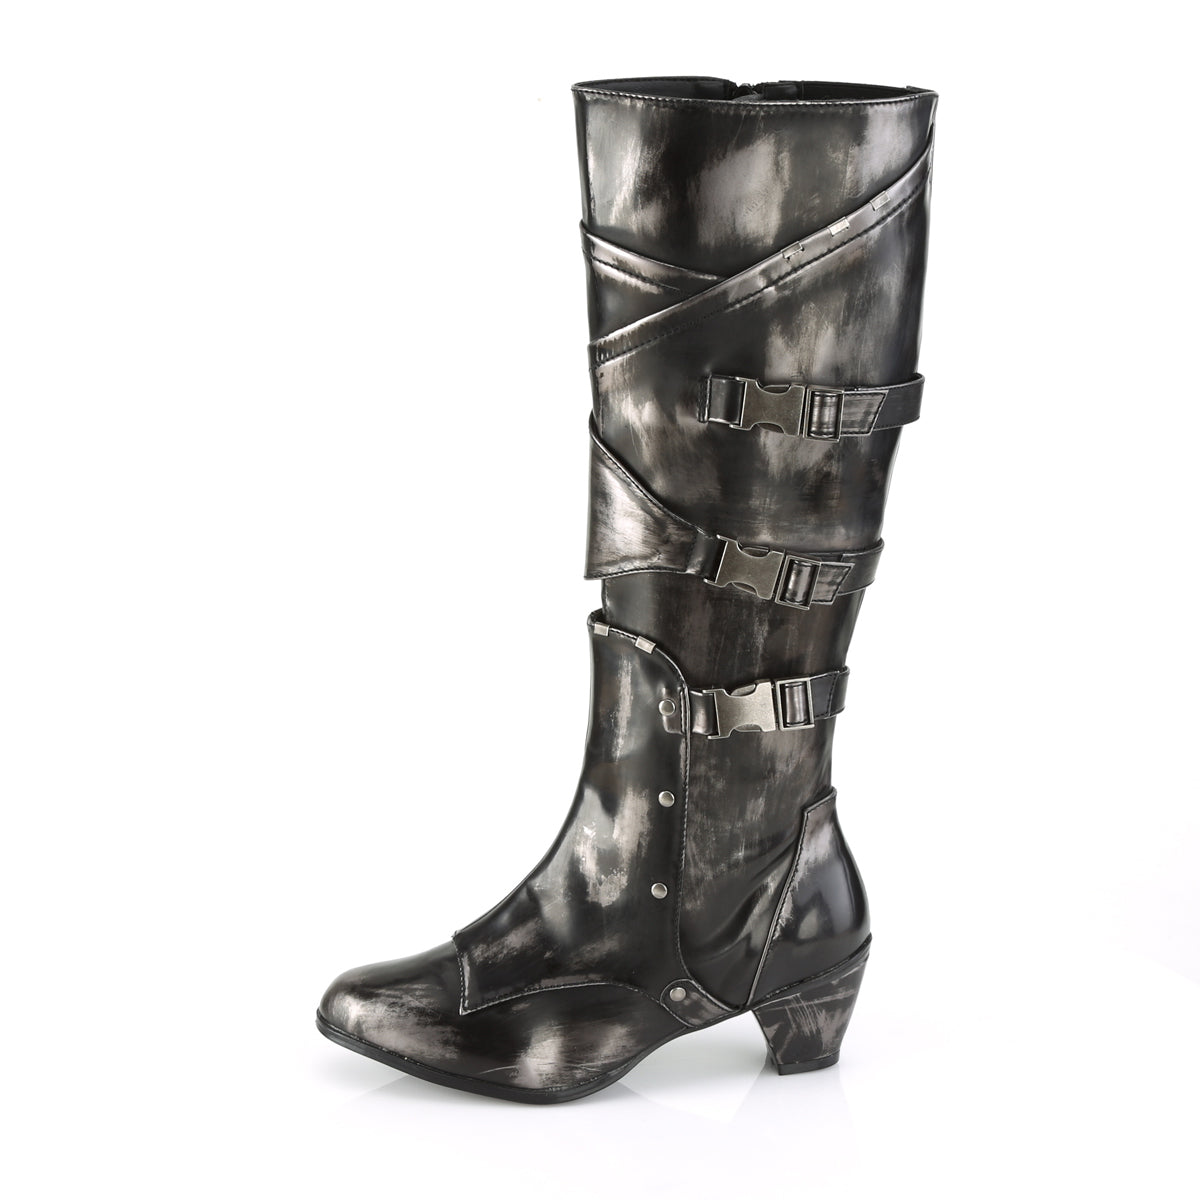 MAIDEN-8820 2.5 Inch Heel Pewter Women's Boots Funtasma Costume Shoes 